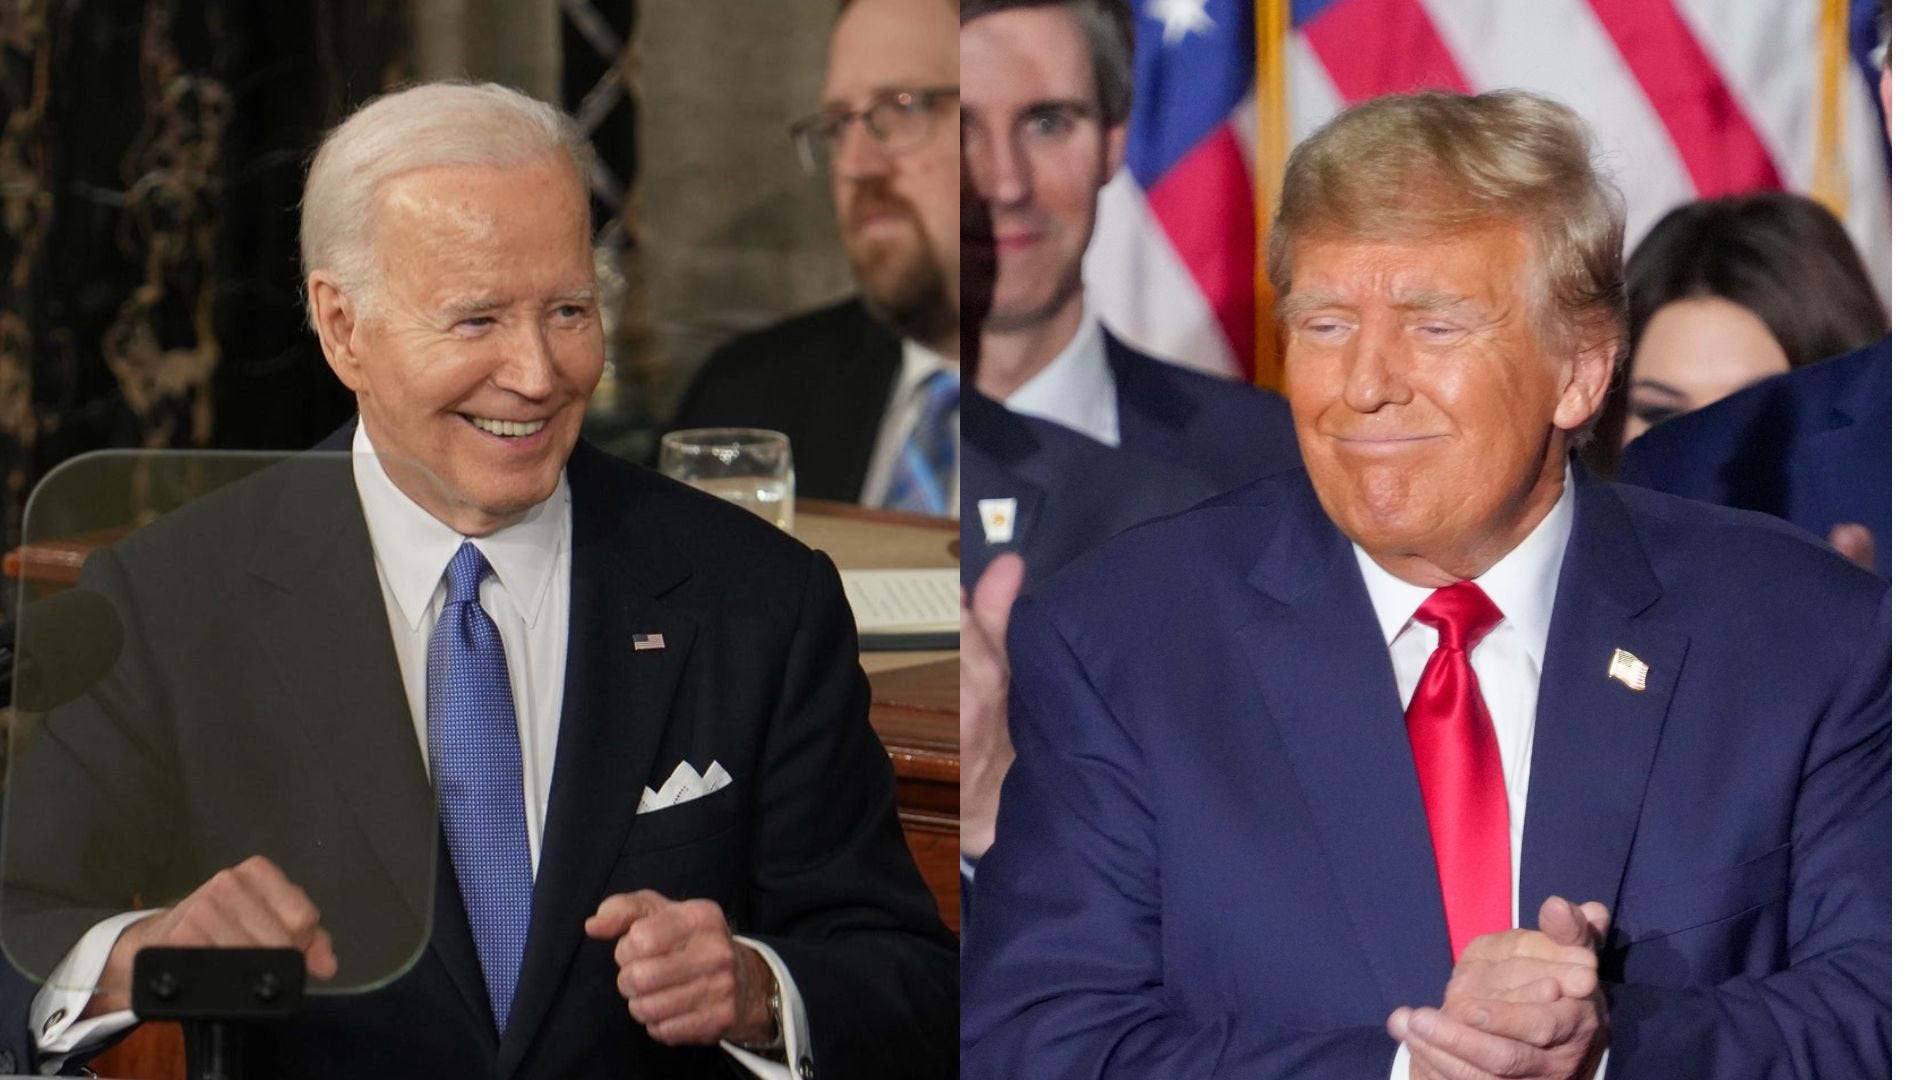 President Joe Biden and former President Donald Trump are shown in USA Today file photos.